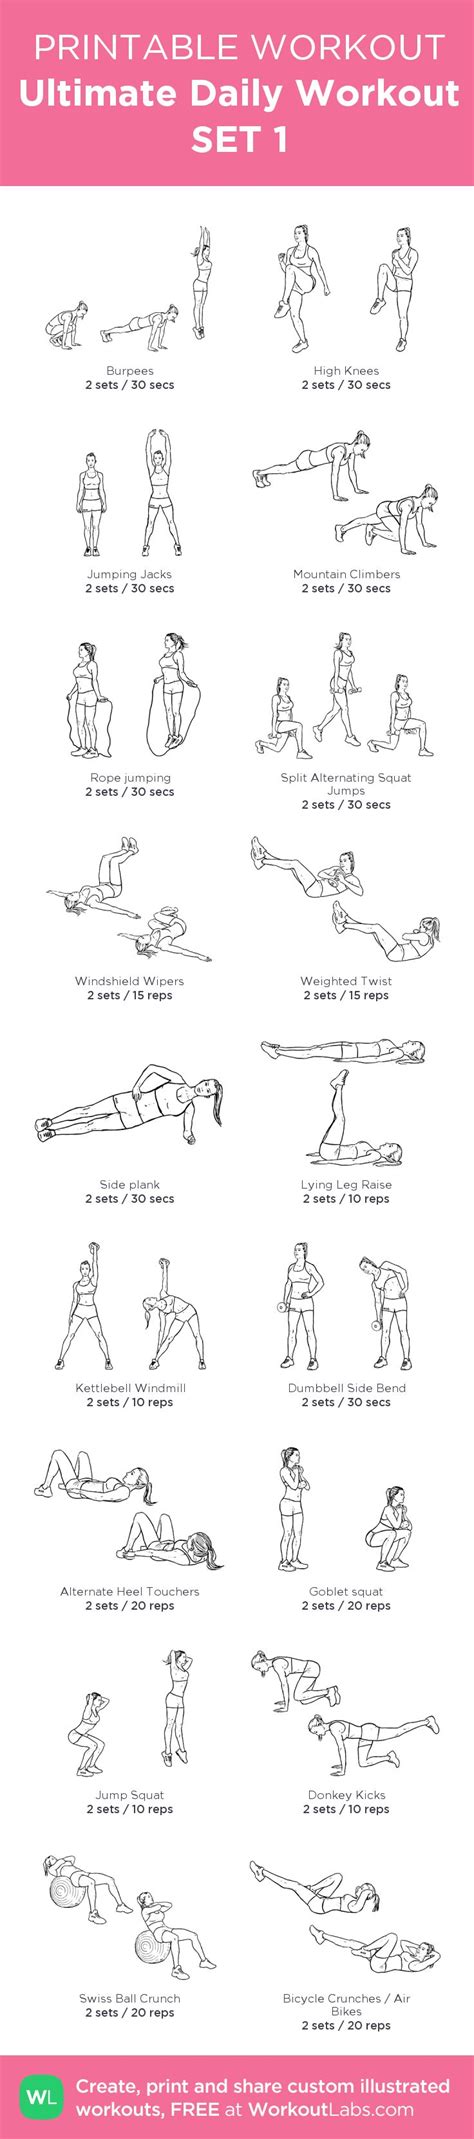 printable workout sheets images  pinterest exercise workouts physical activities